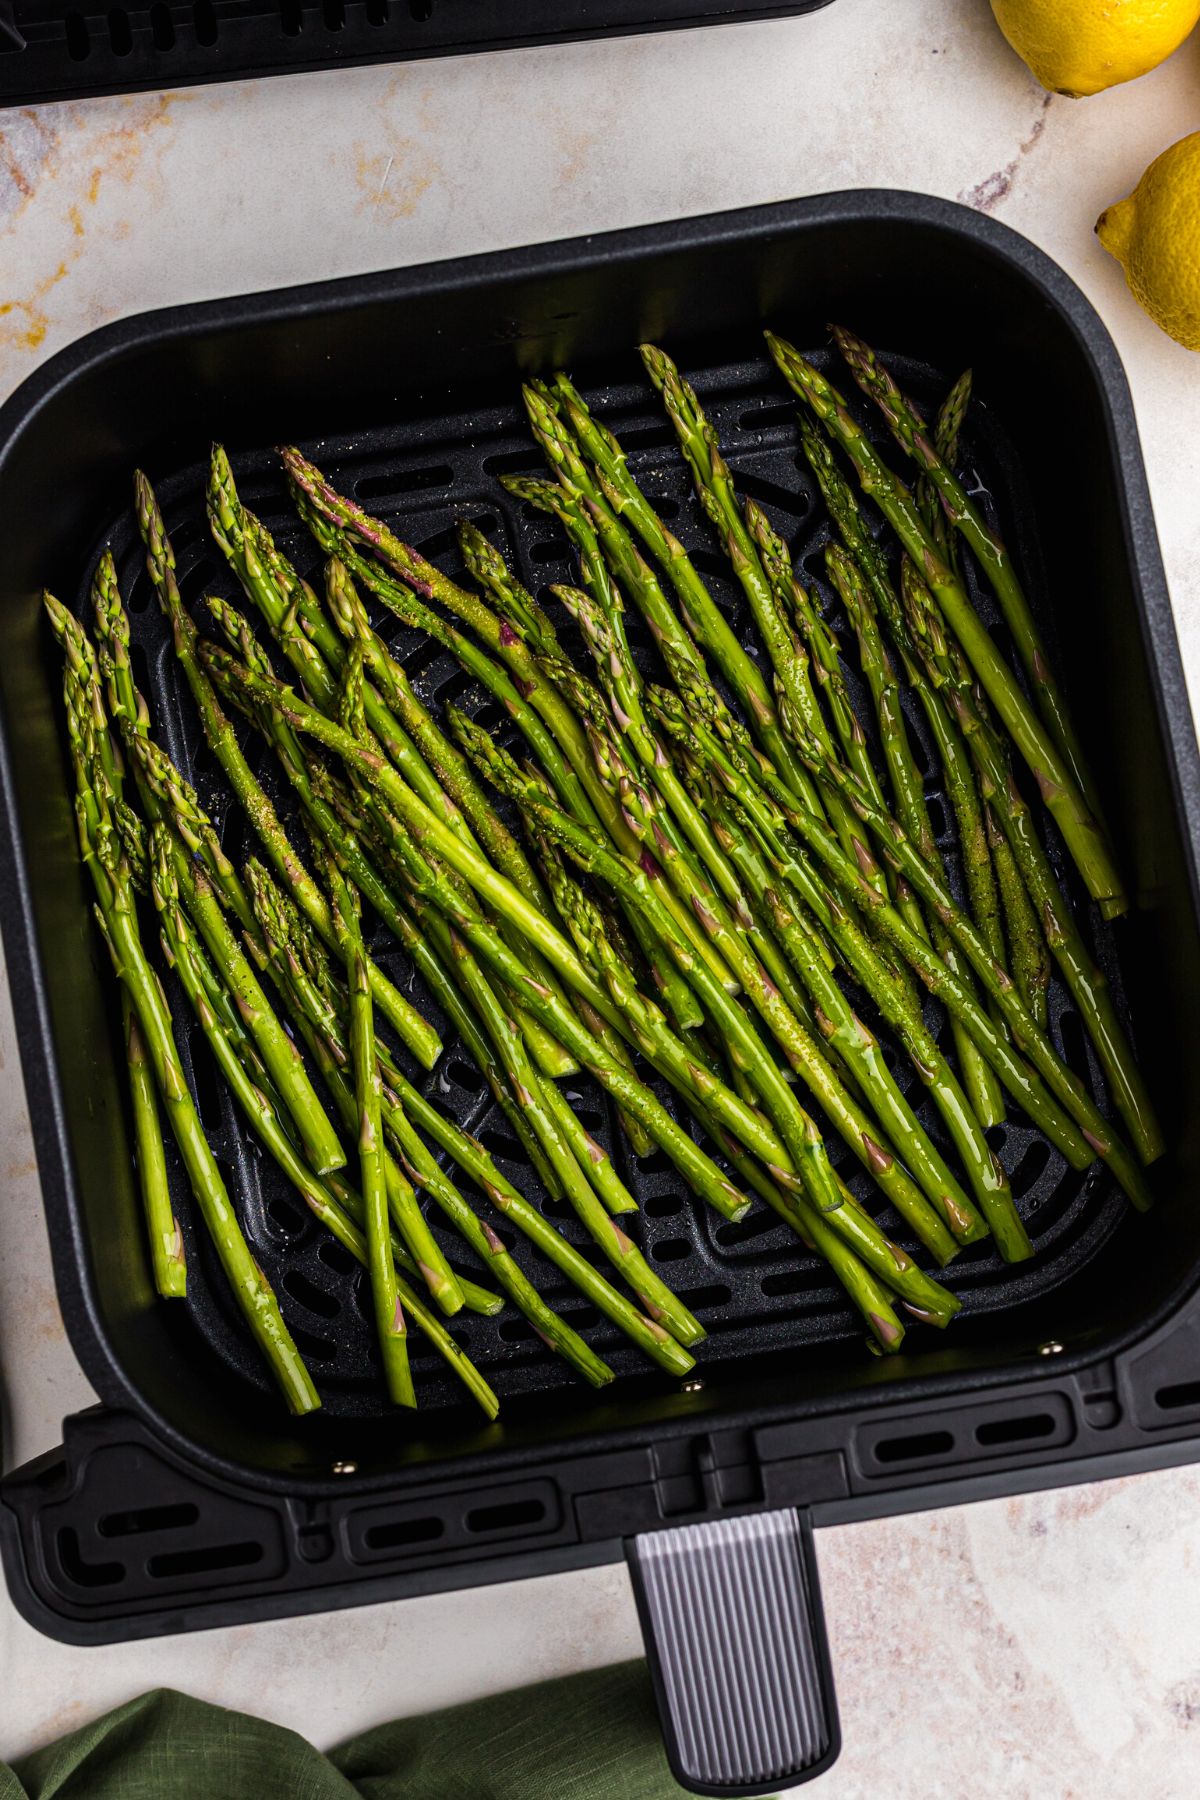 Asparagus in the air fryer basket after being seasoned and before being cooked